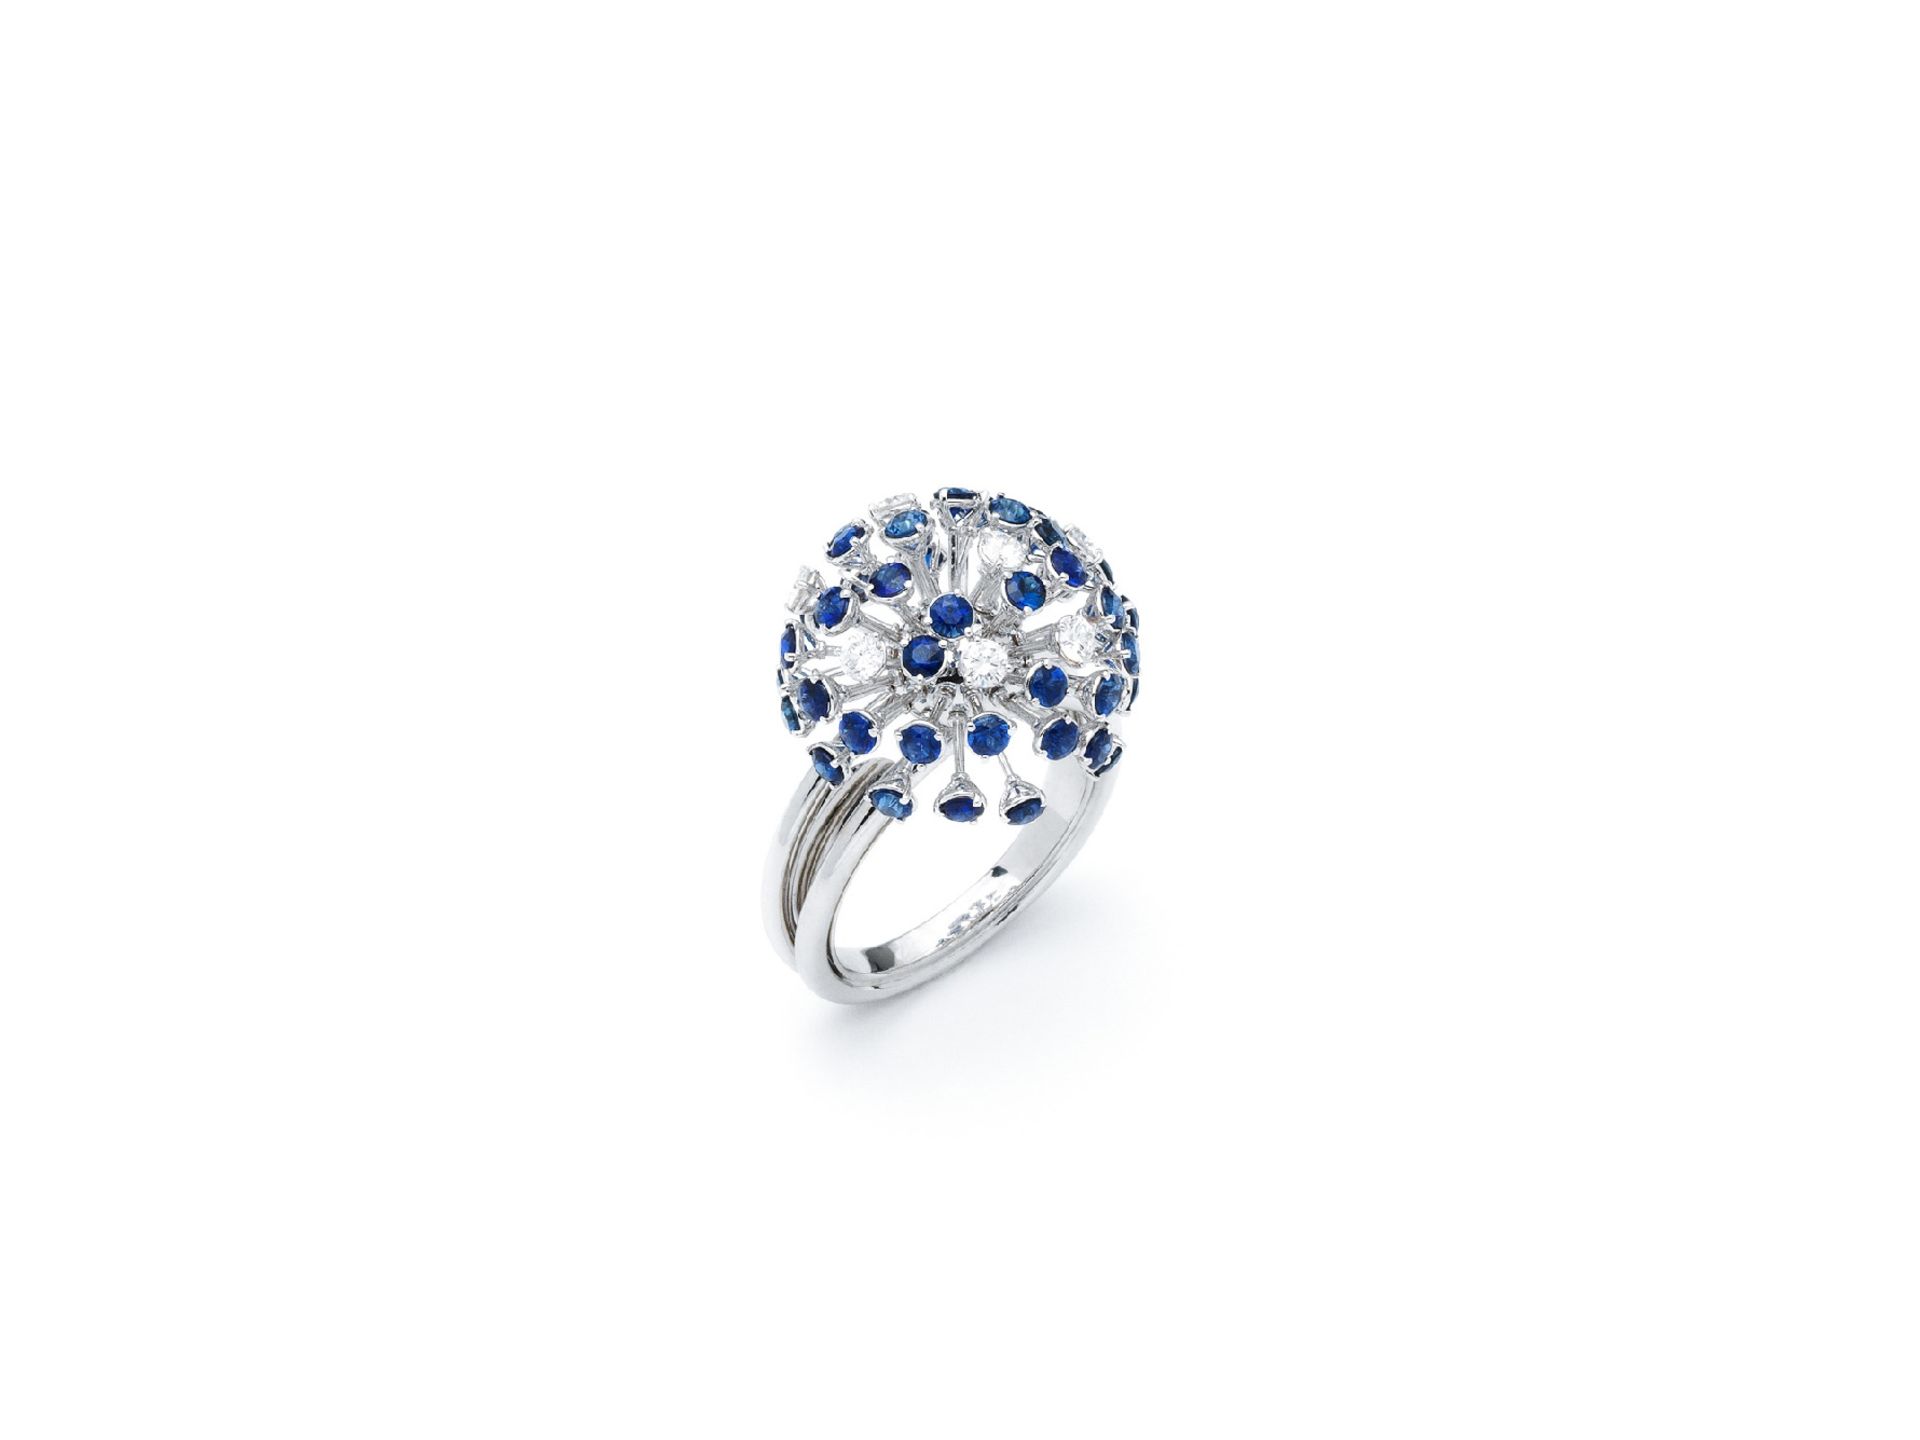 Ring with brilliant diamonds and sapphires - Image 2 of 5